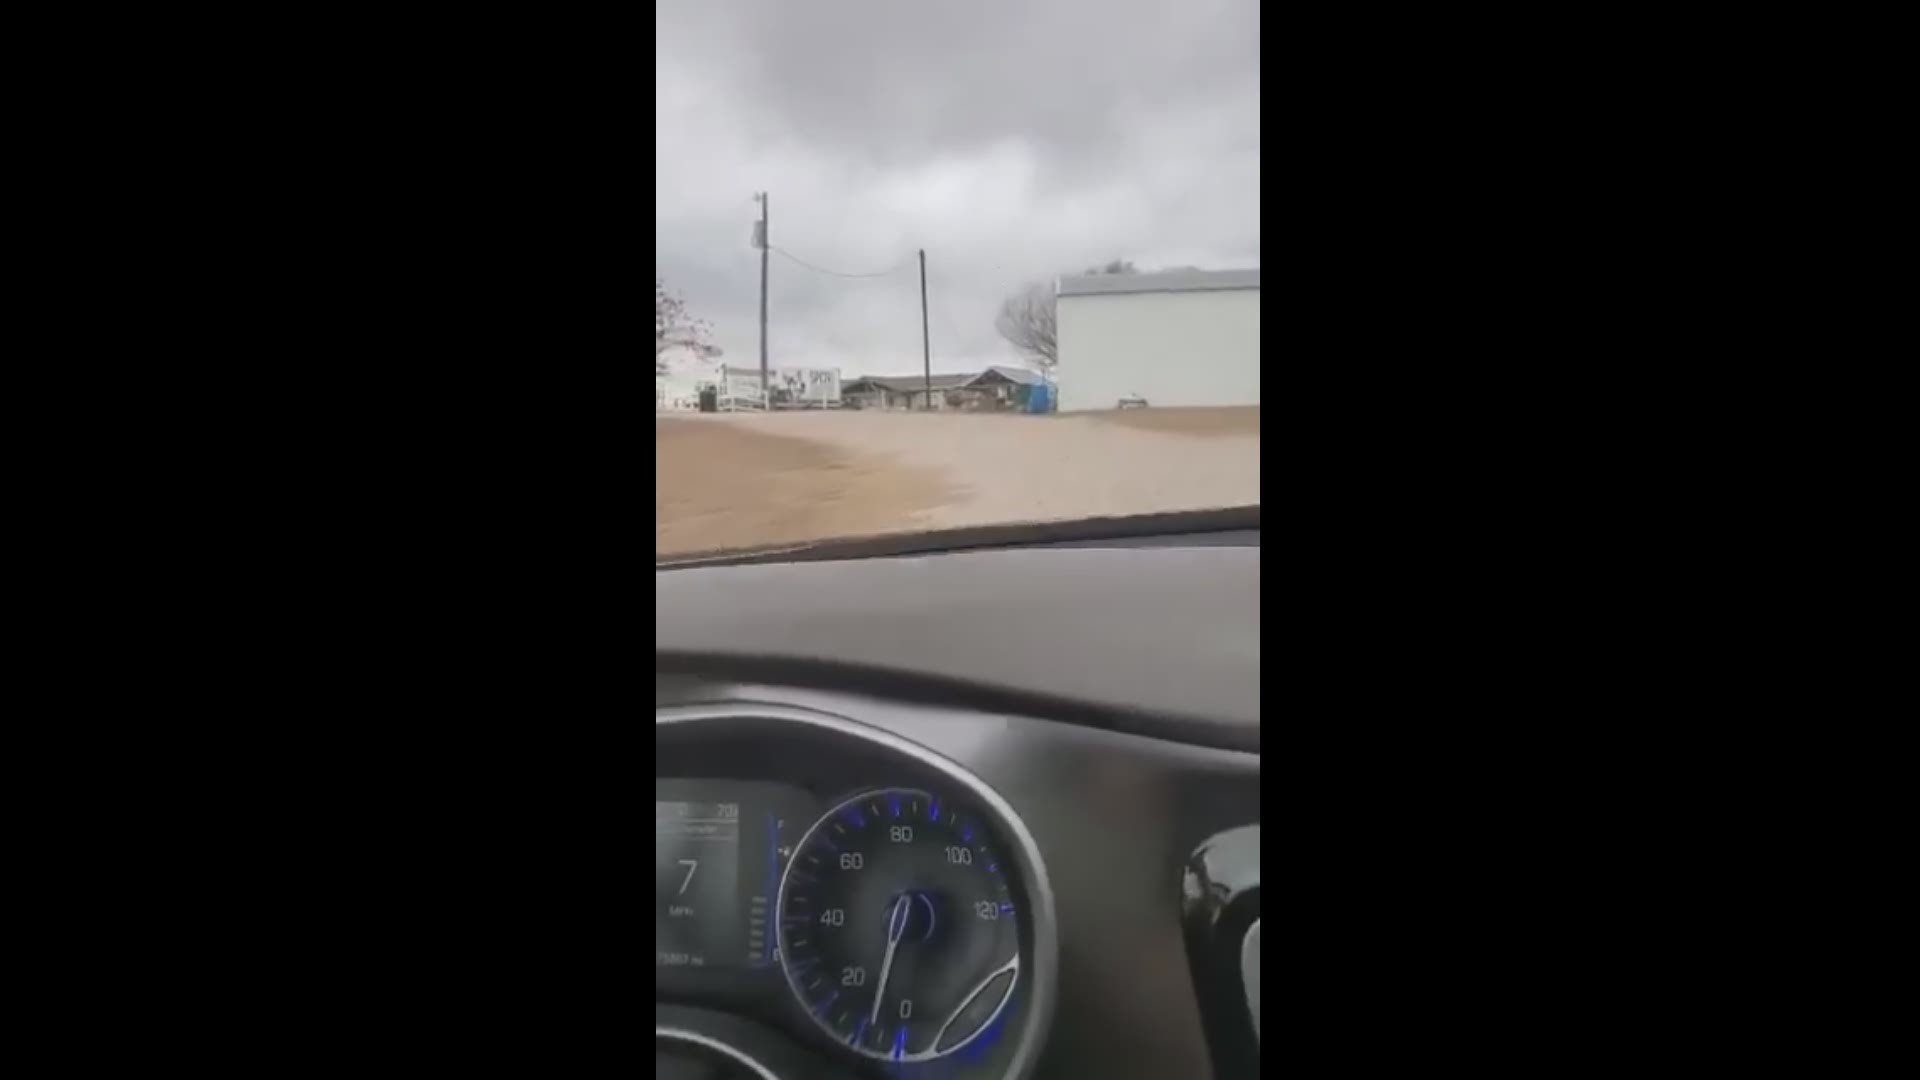 Courtesy Kimberly Jones captured video of authorities at the scene where more than 100 animals were removed from a double-wide trailer in Nevada, Texas.